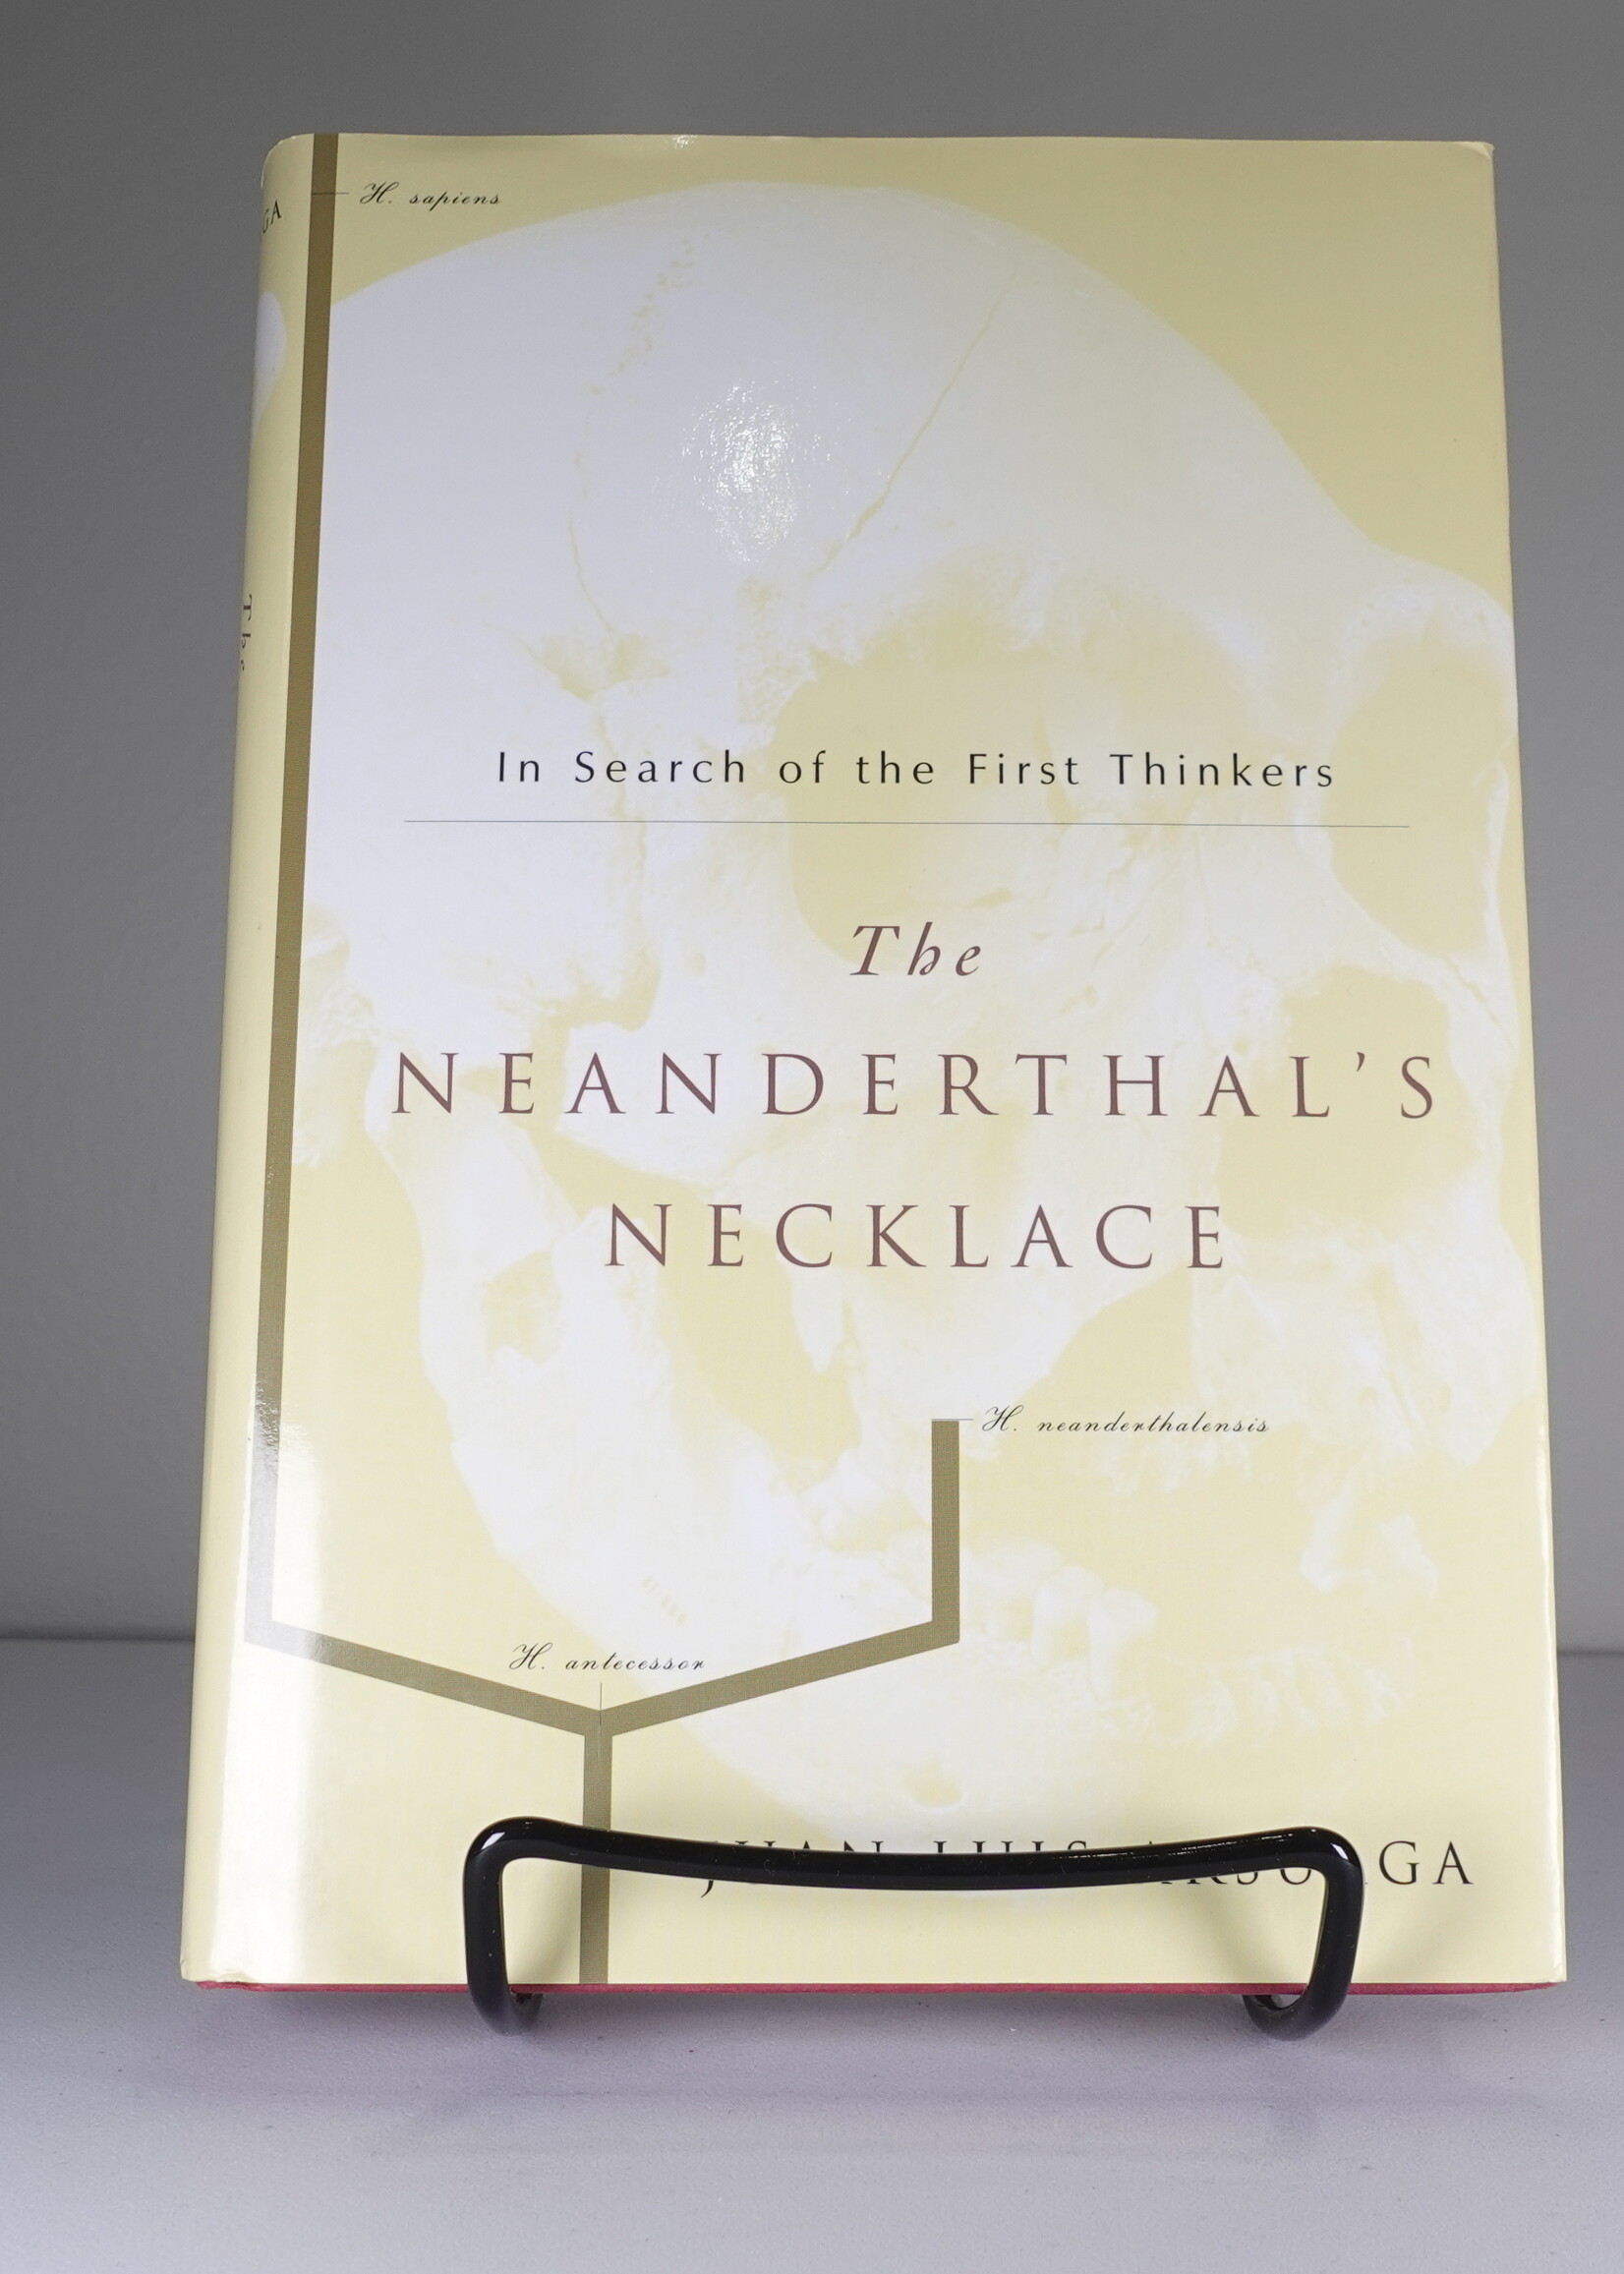 The Neanderthals’s Necklace